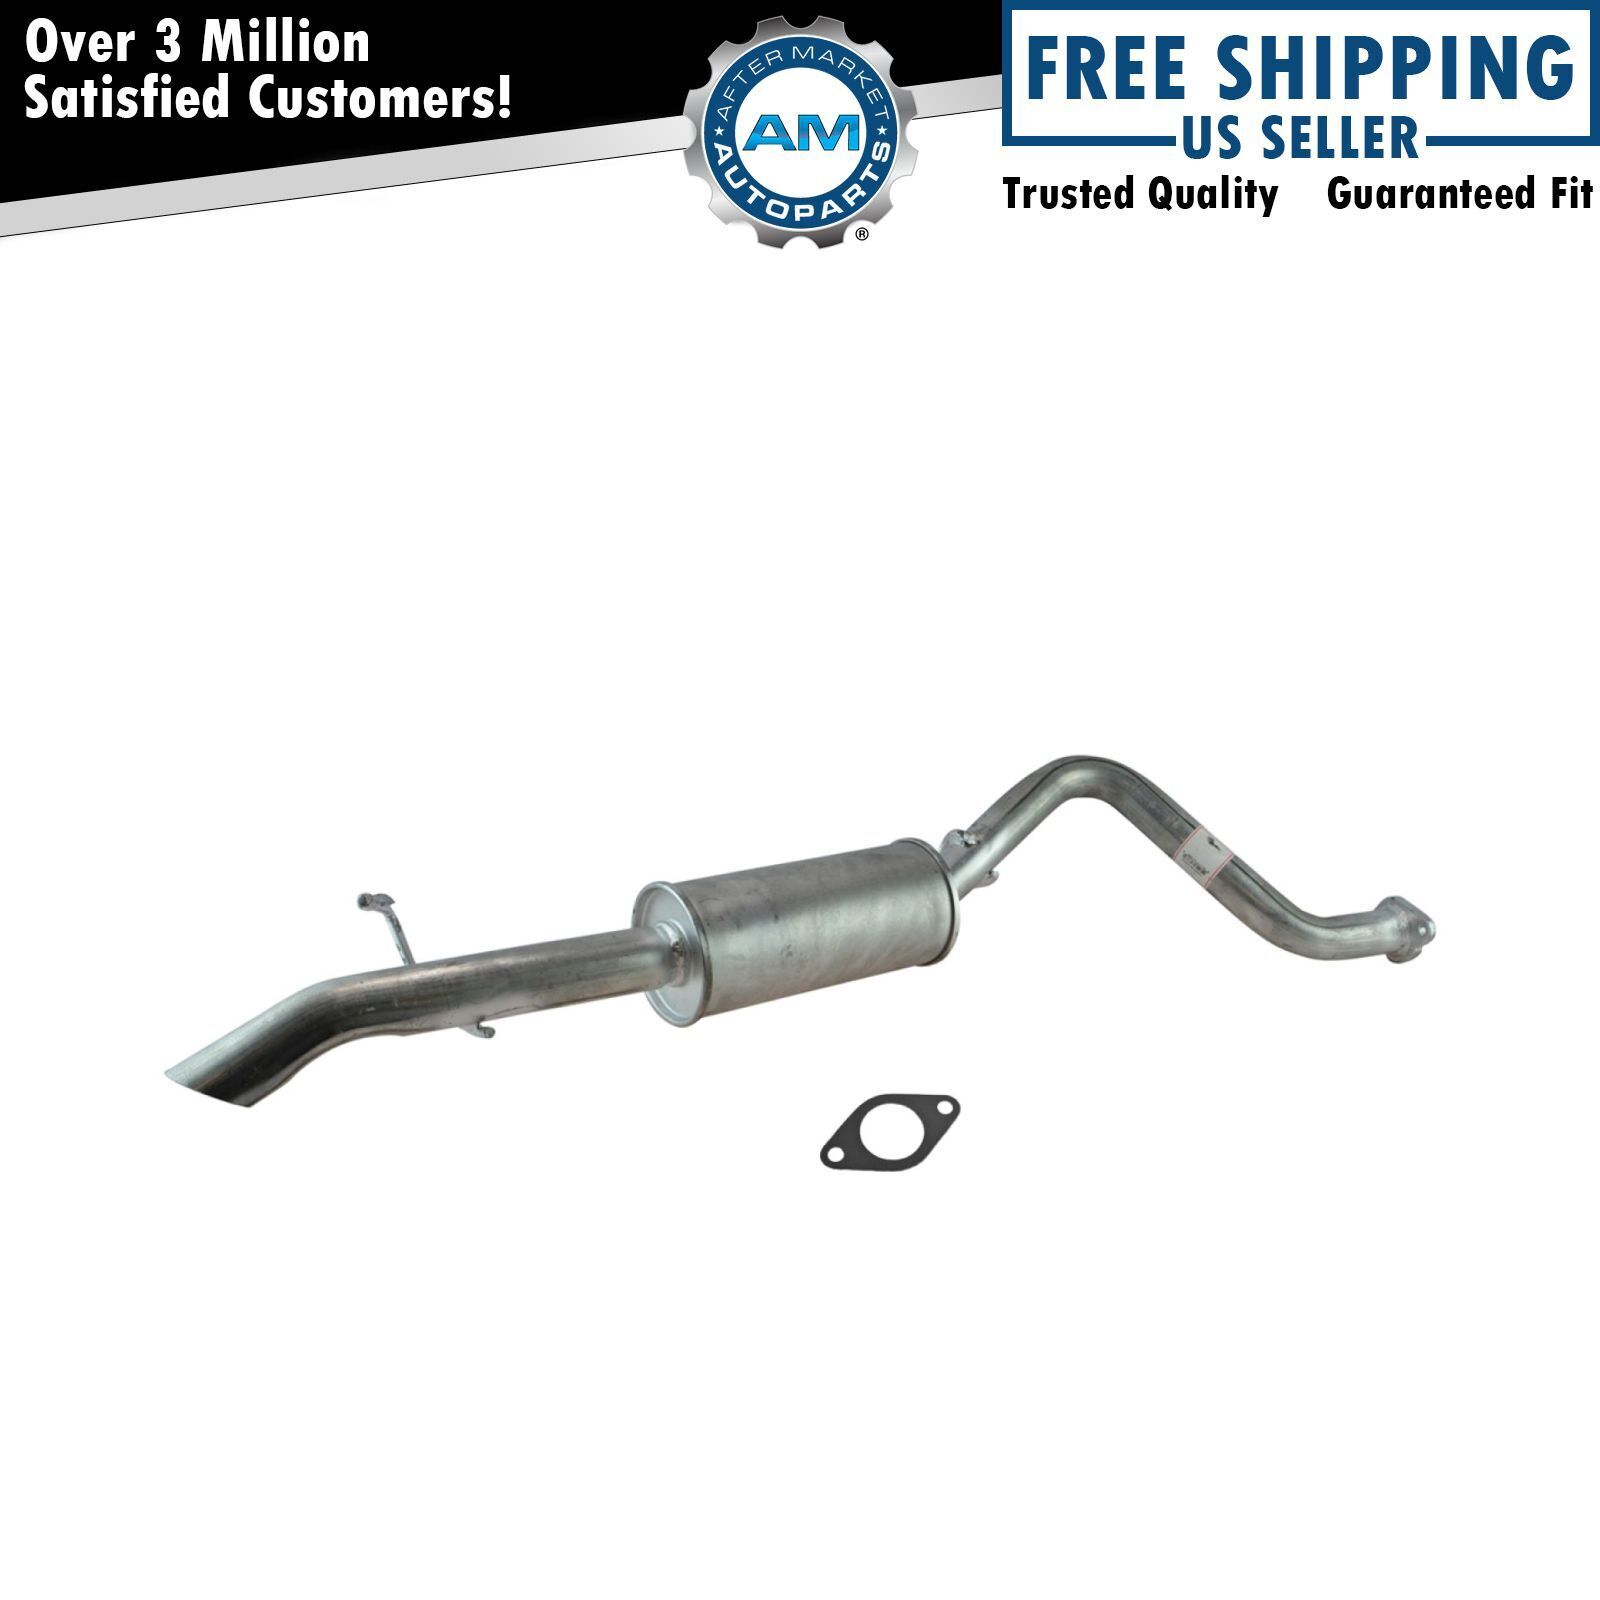 Exhaust Rear Muffler with Gasket for Ford Escape Mazda Tribute SUV Truck New